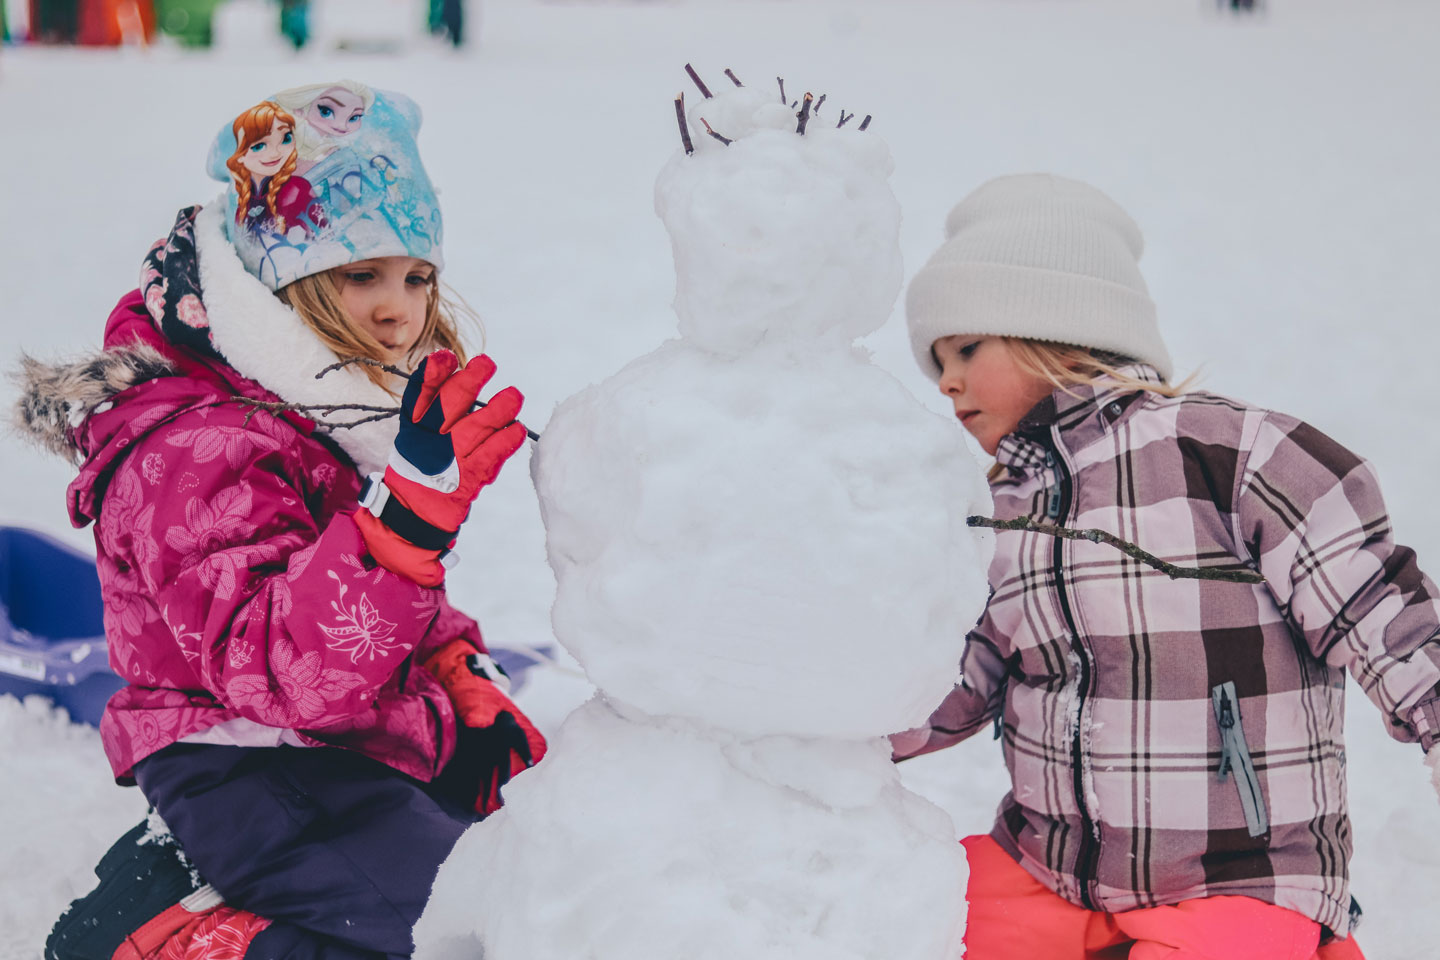 5 Fun Things to Do with Kids in Winter